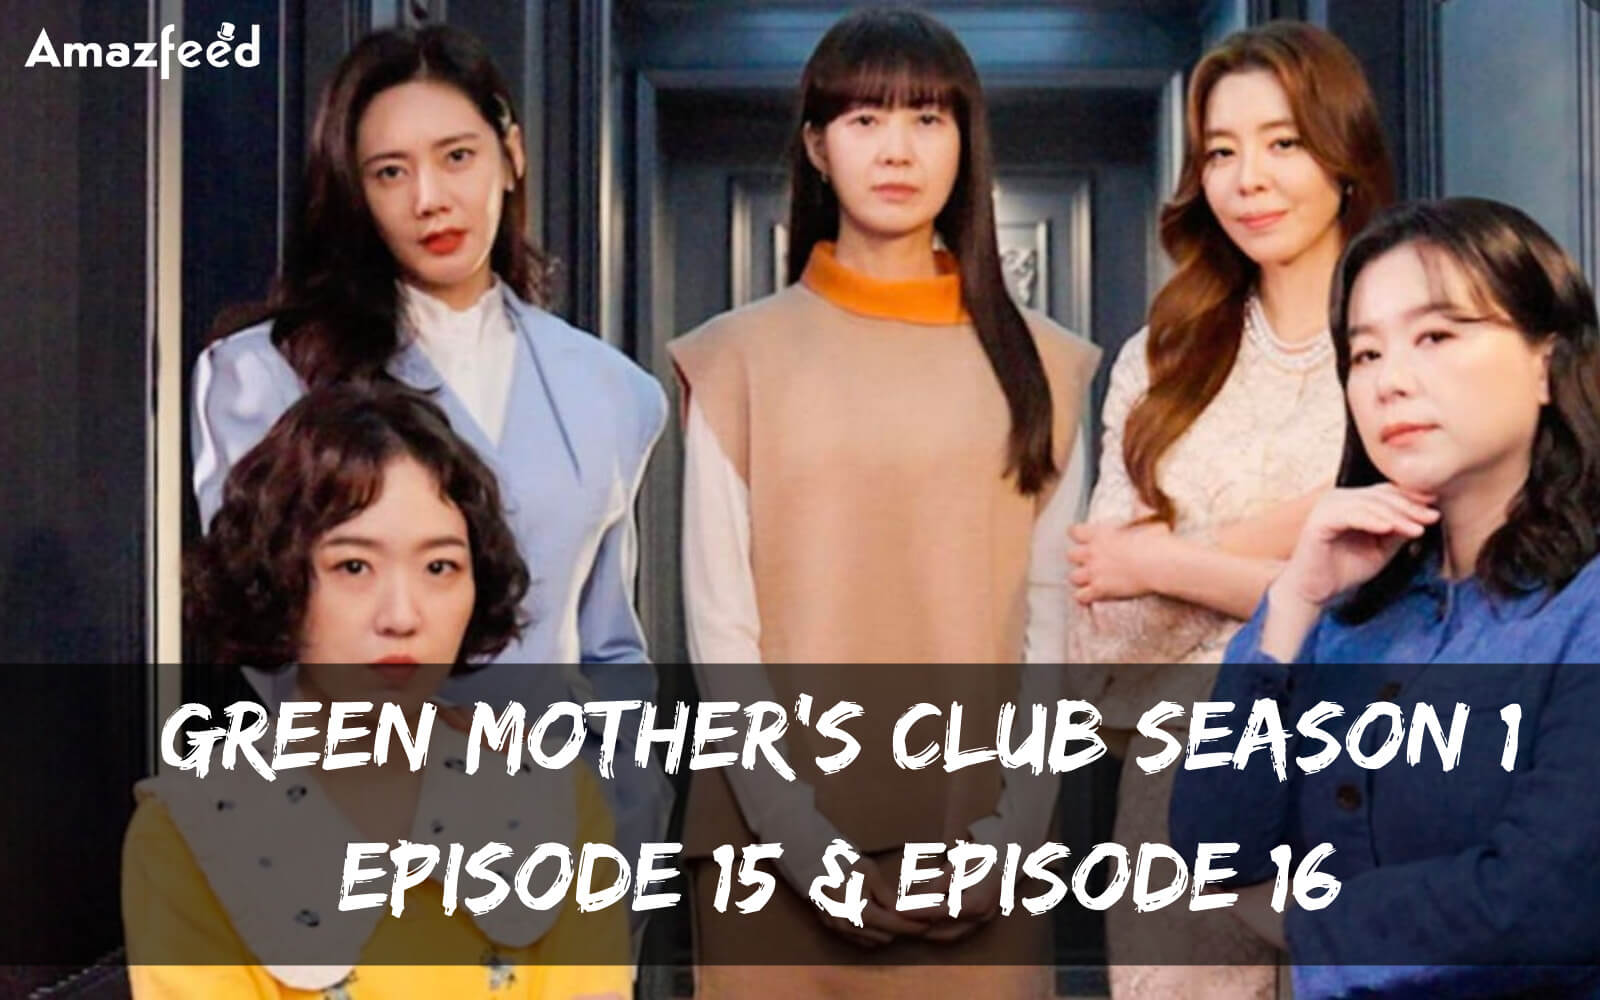 What is the release date of Green Mother’s Club Season 1 Episode 15 & Episode 16 (1)